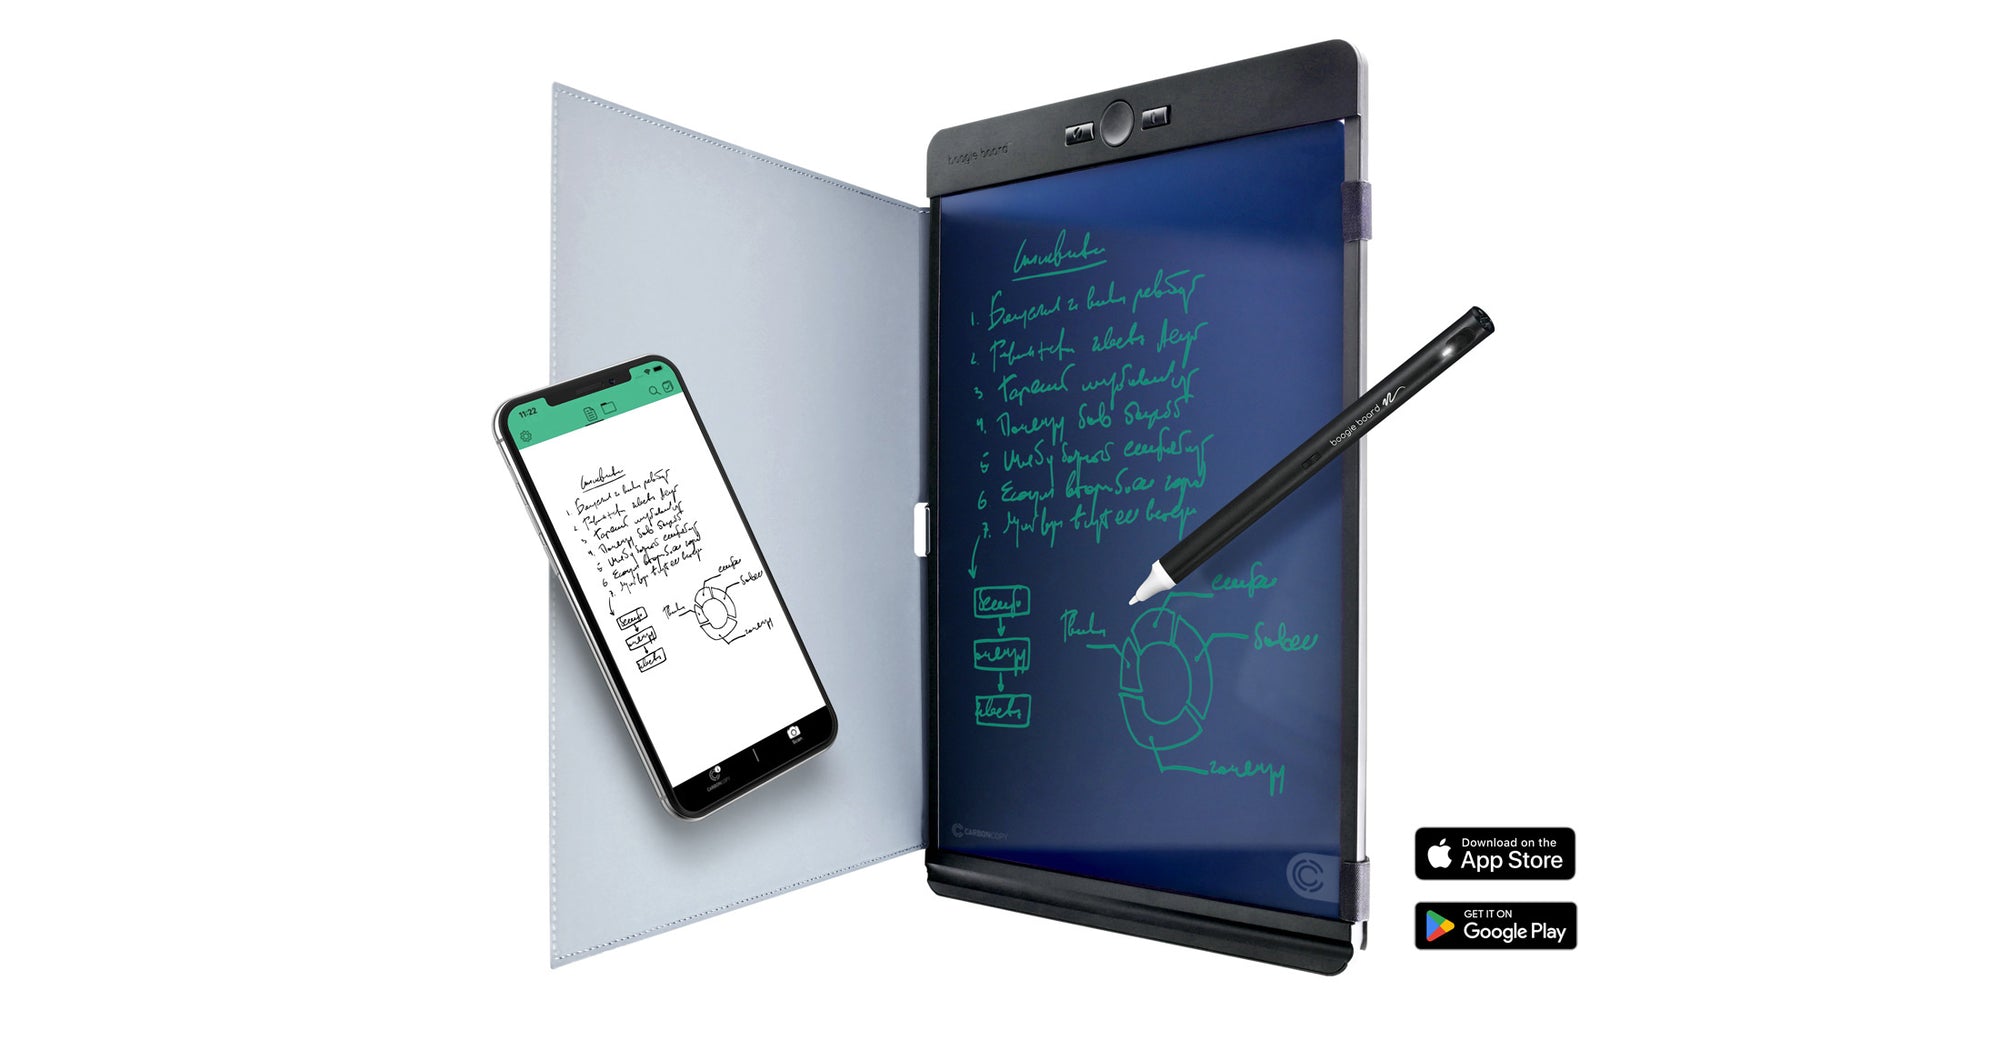 Image of Blackboard Letter with Smart Pen - Folio and writing on display - app icons and app displayed on phone